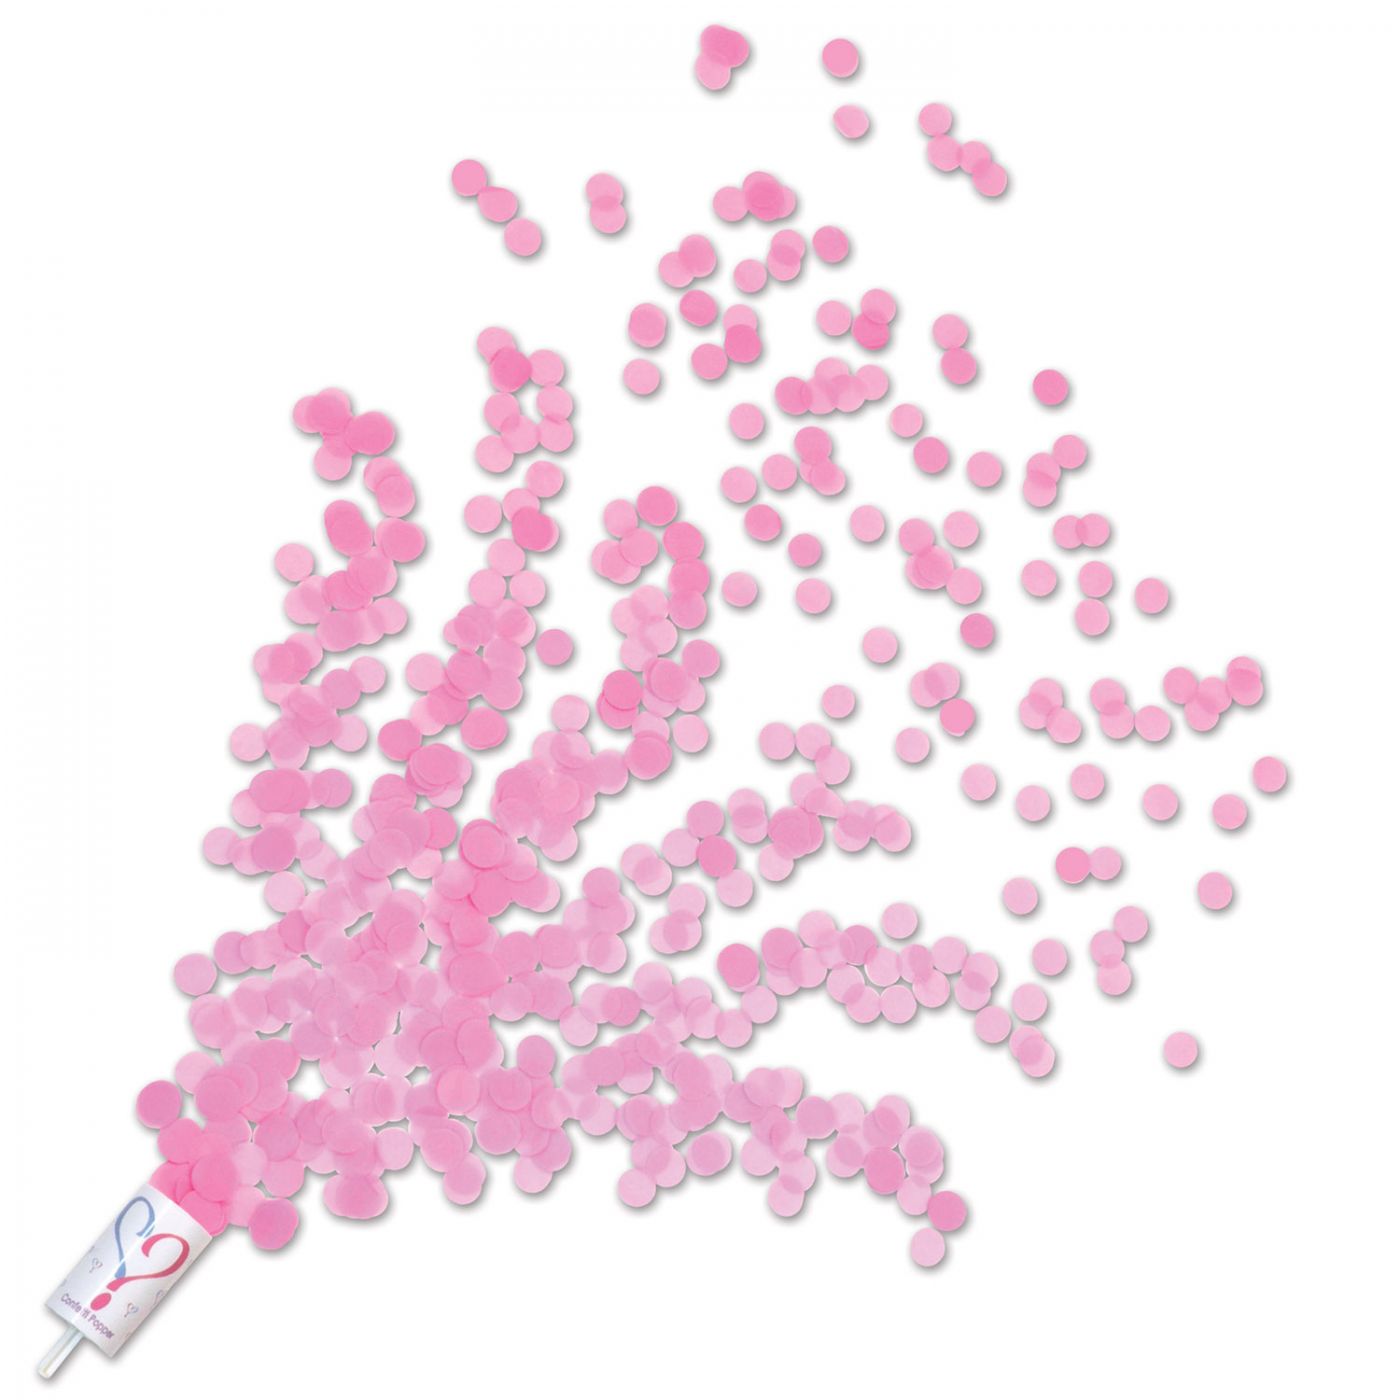 Gender Reveal Push Up Confetti Poppers image